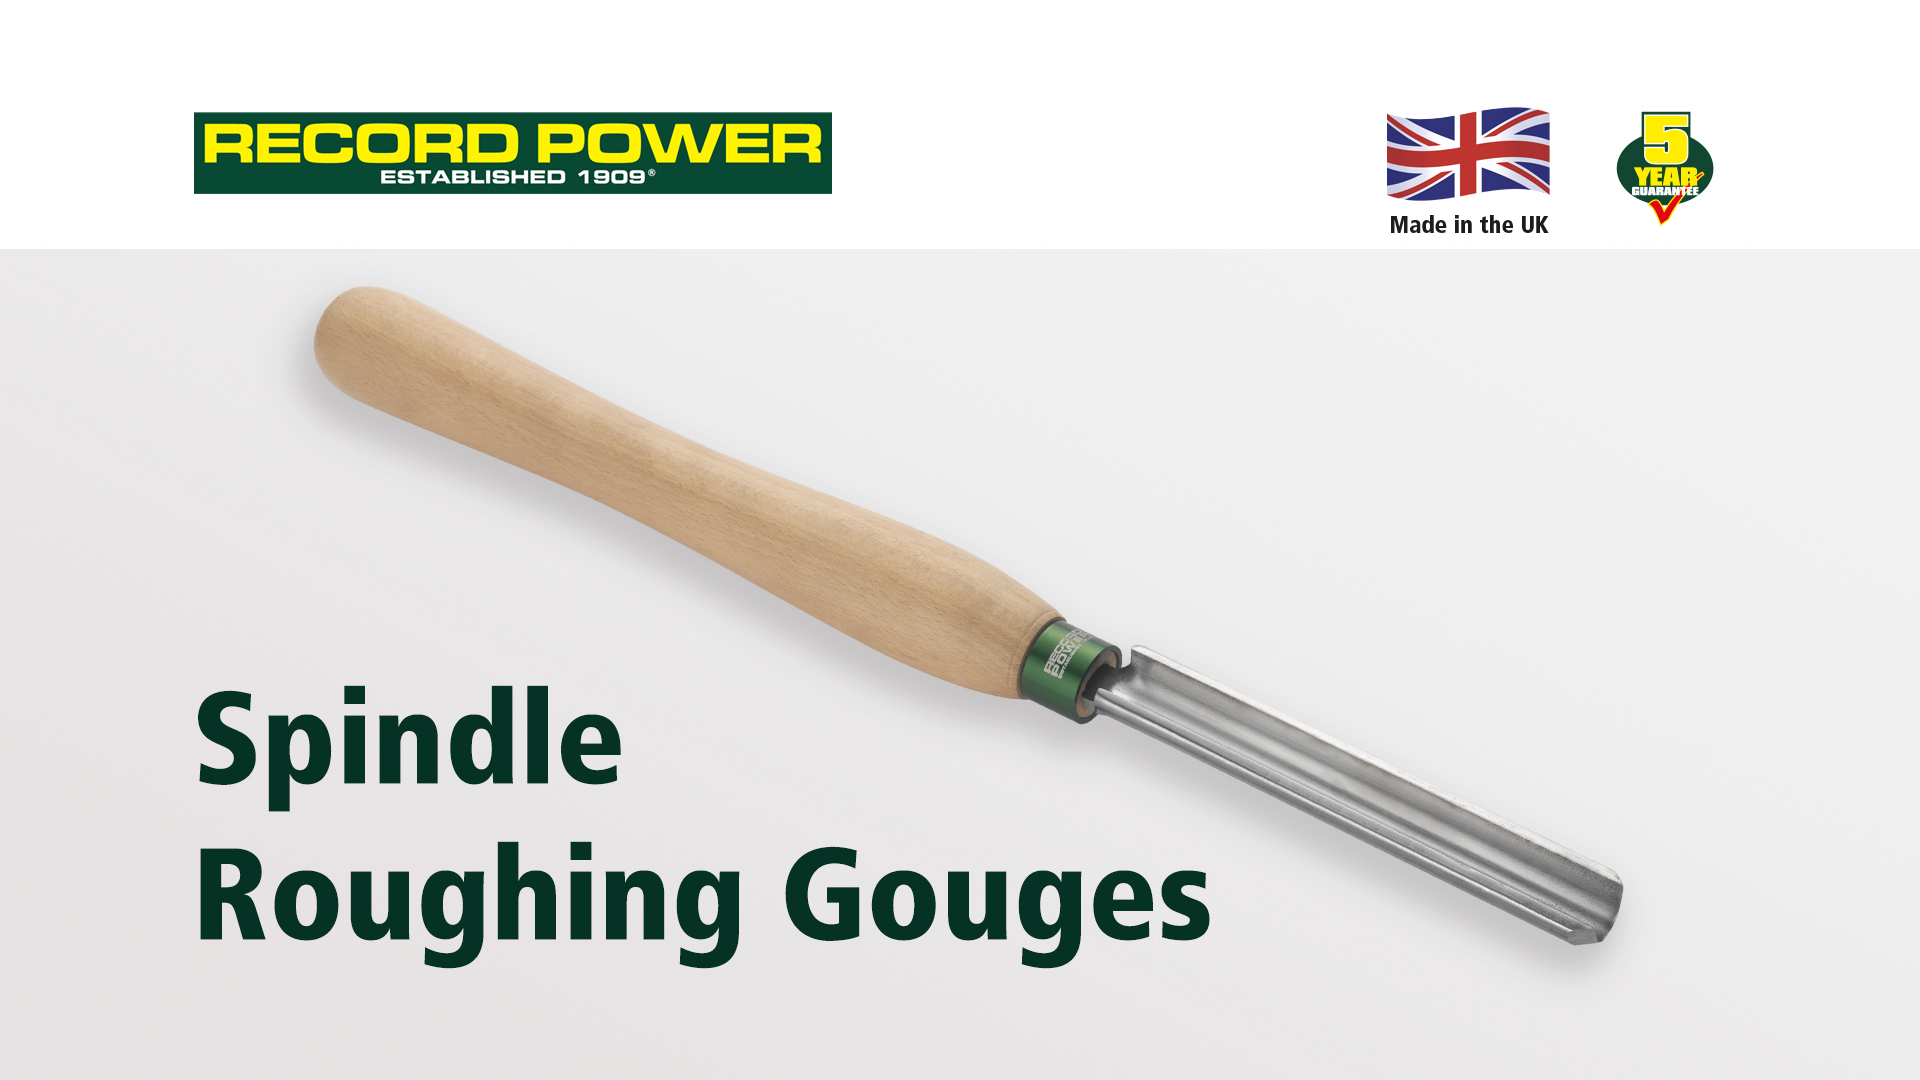 Spindle Roughing Gouges